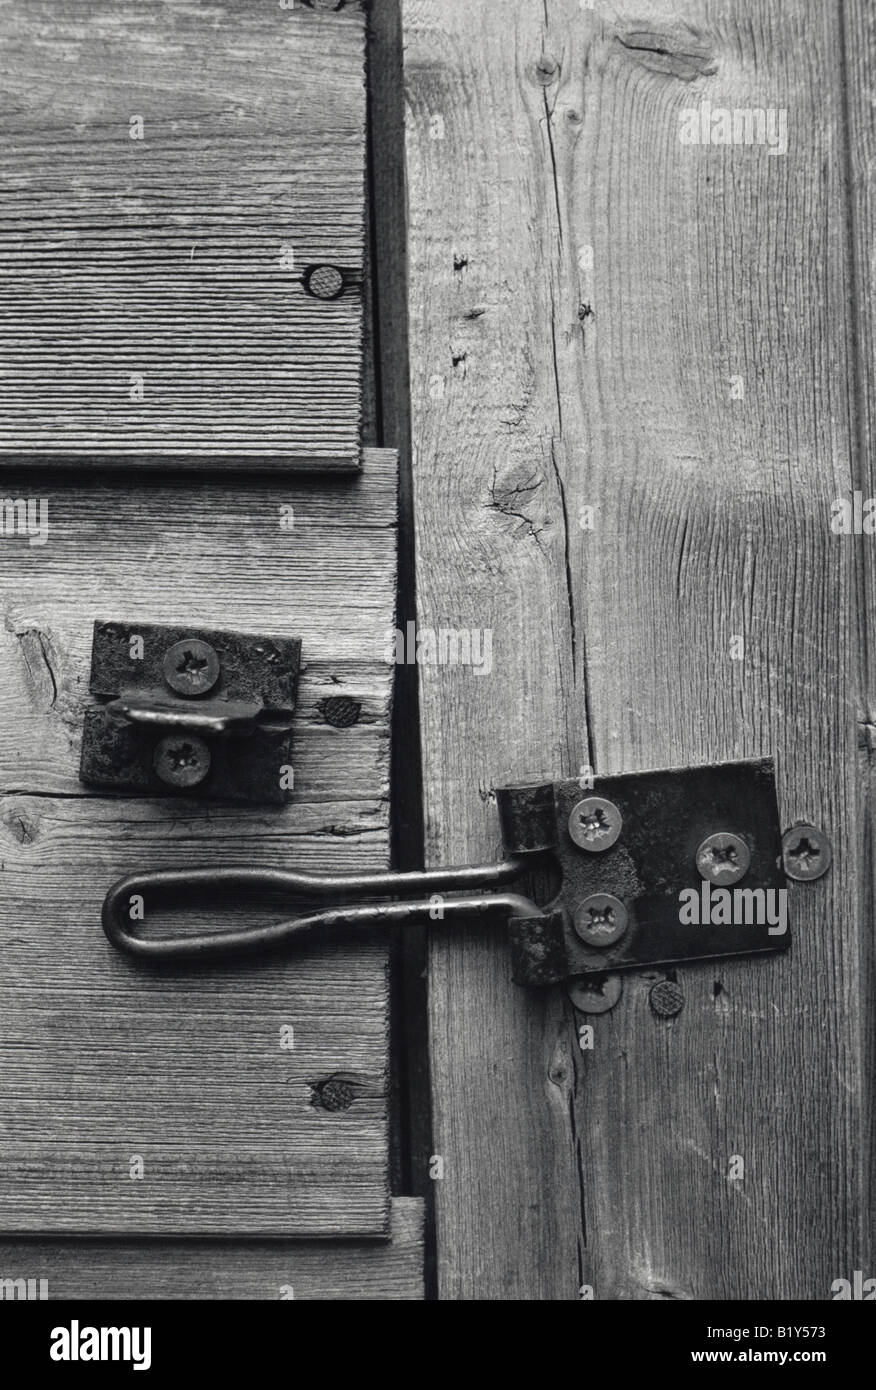 Black and white close up of a worn wooden shed door with a misaligned latch off centre Stock Photo